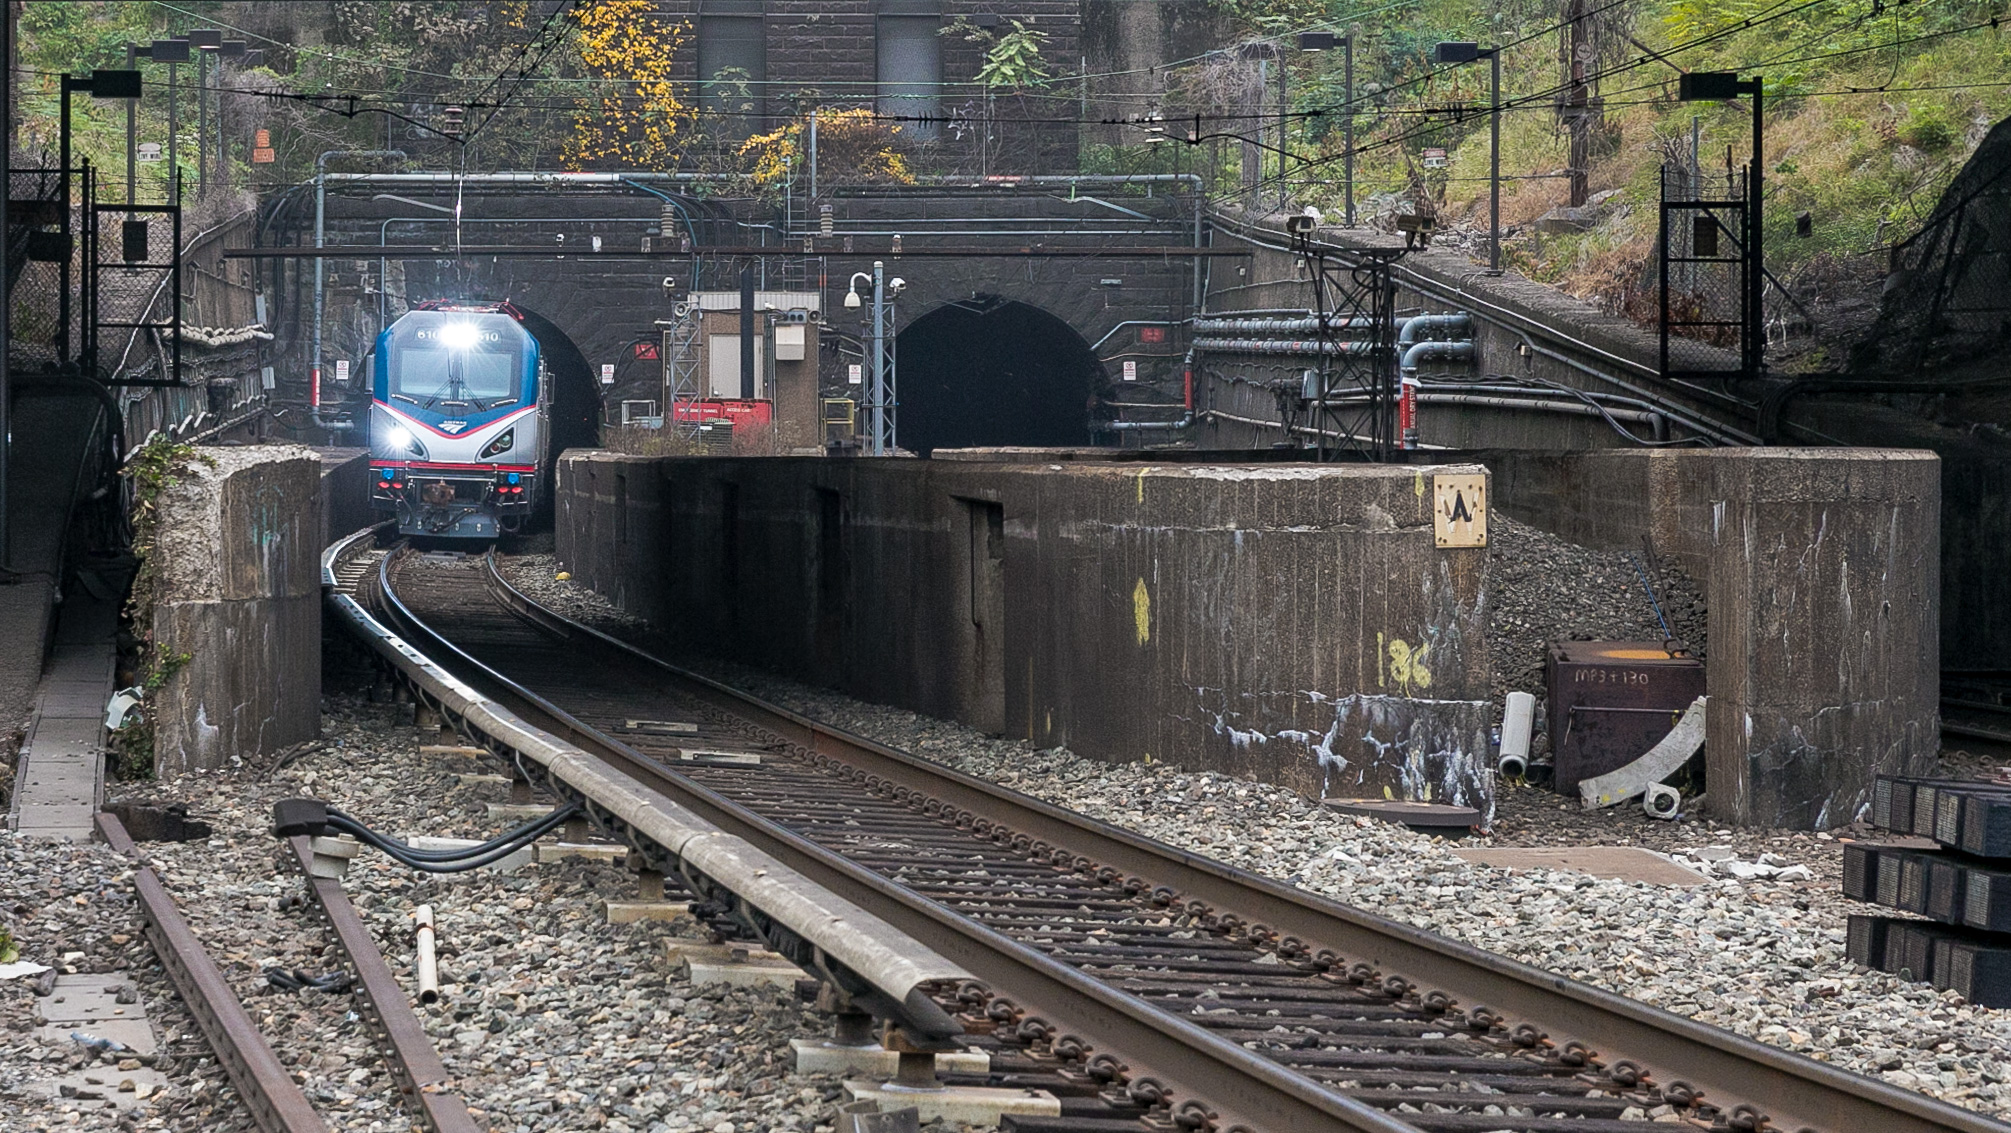 An Amtrak train exits the north tube of the Hudson River Tunnel on its way to New Jersey from New York